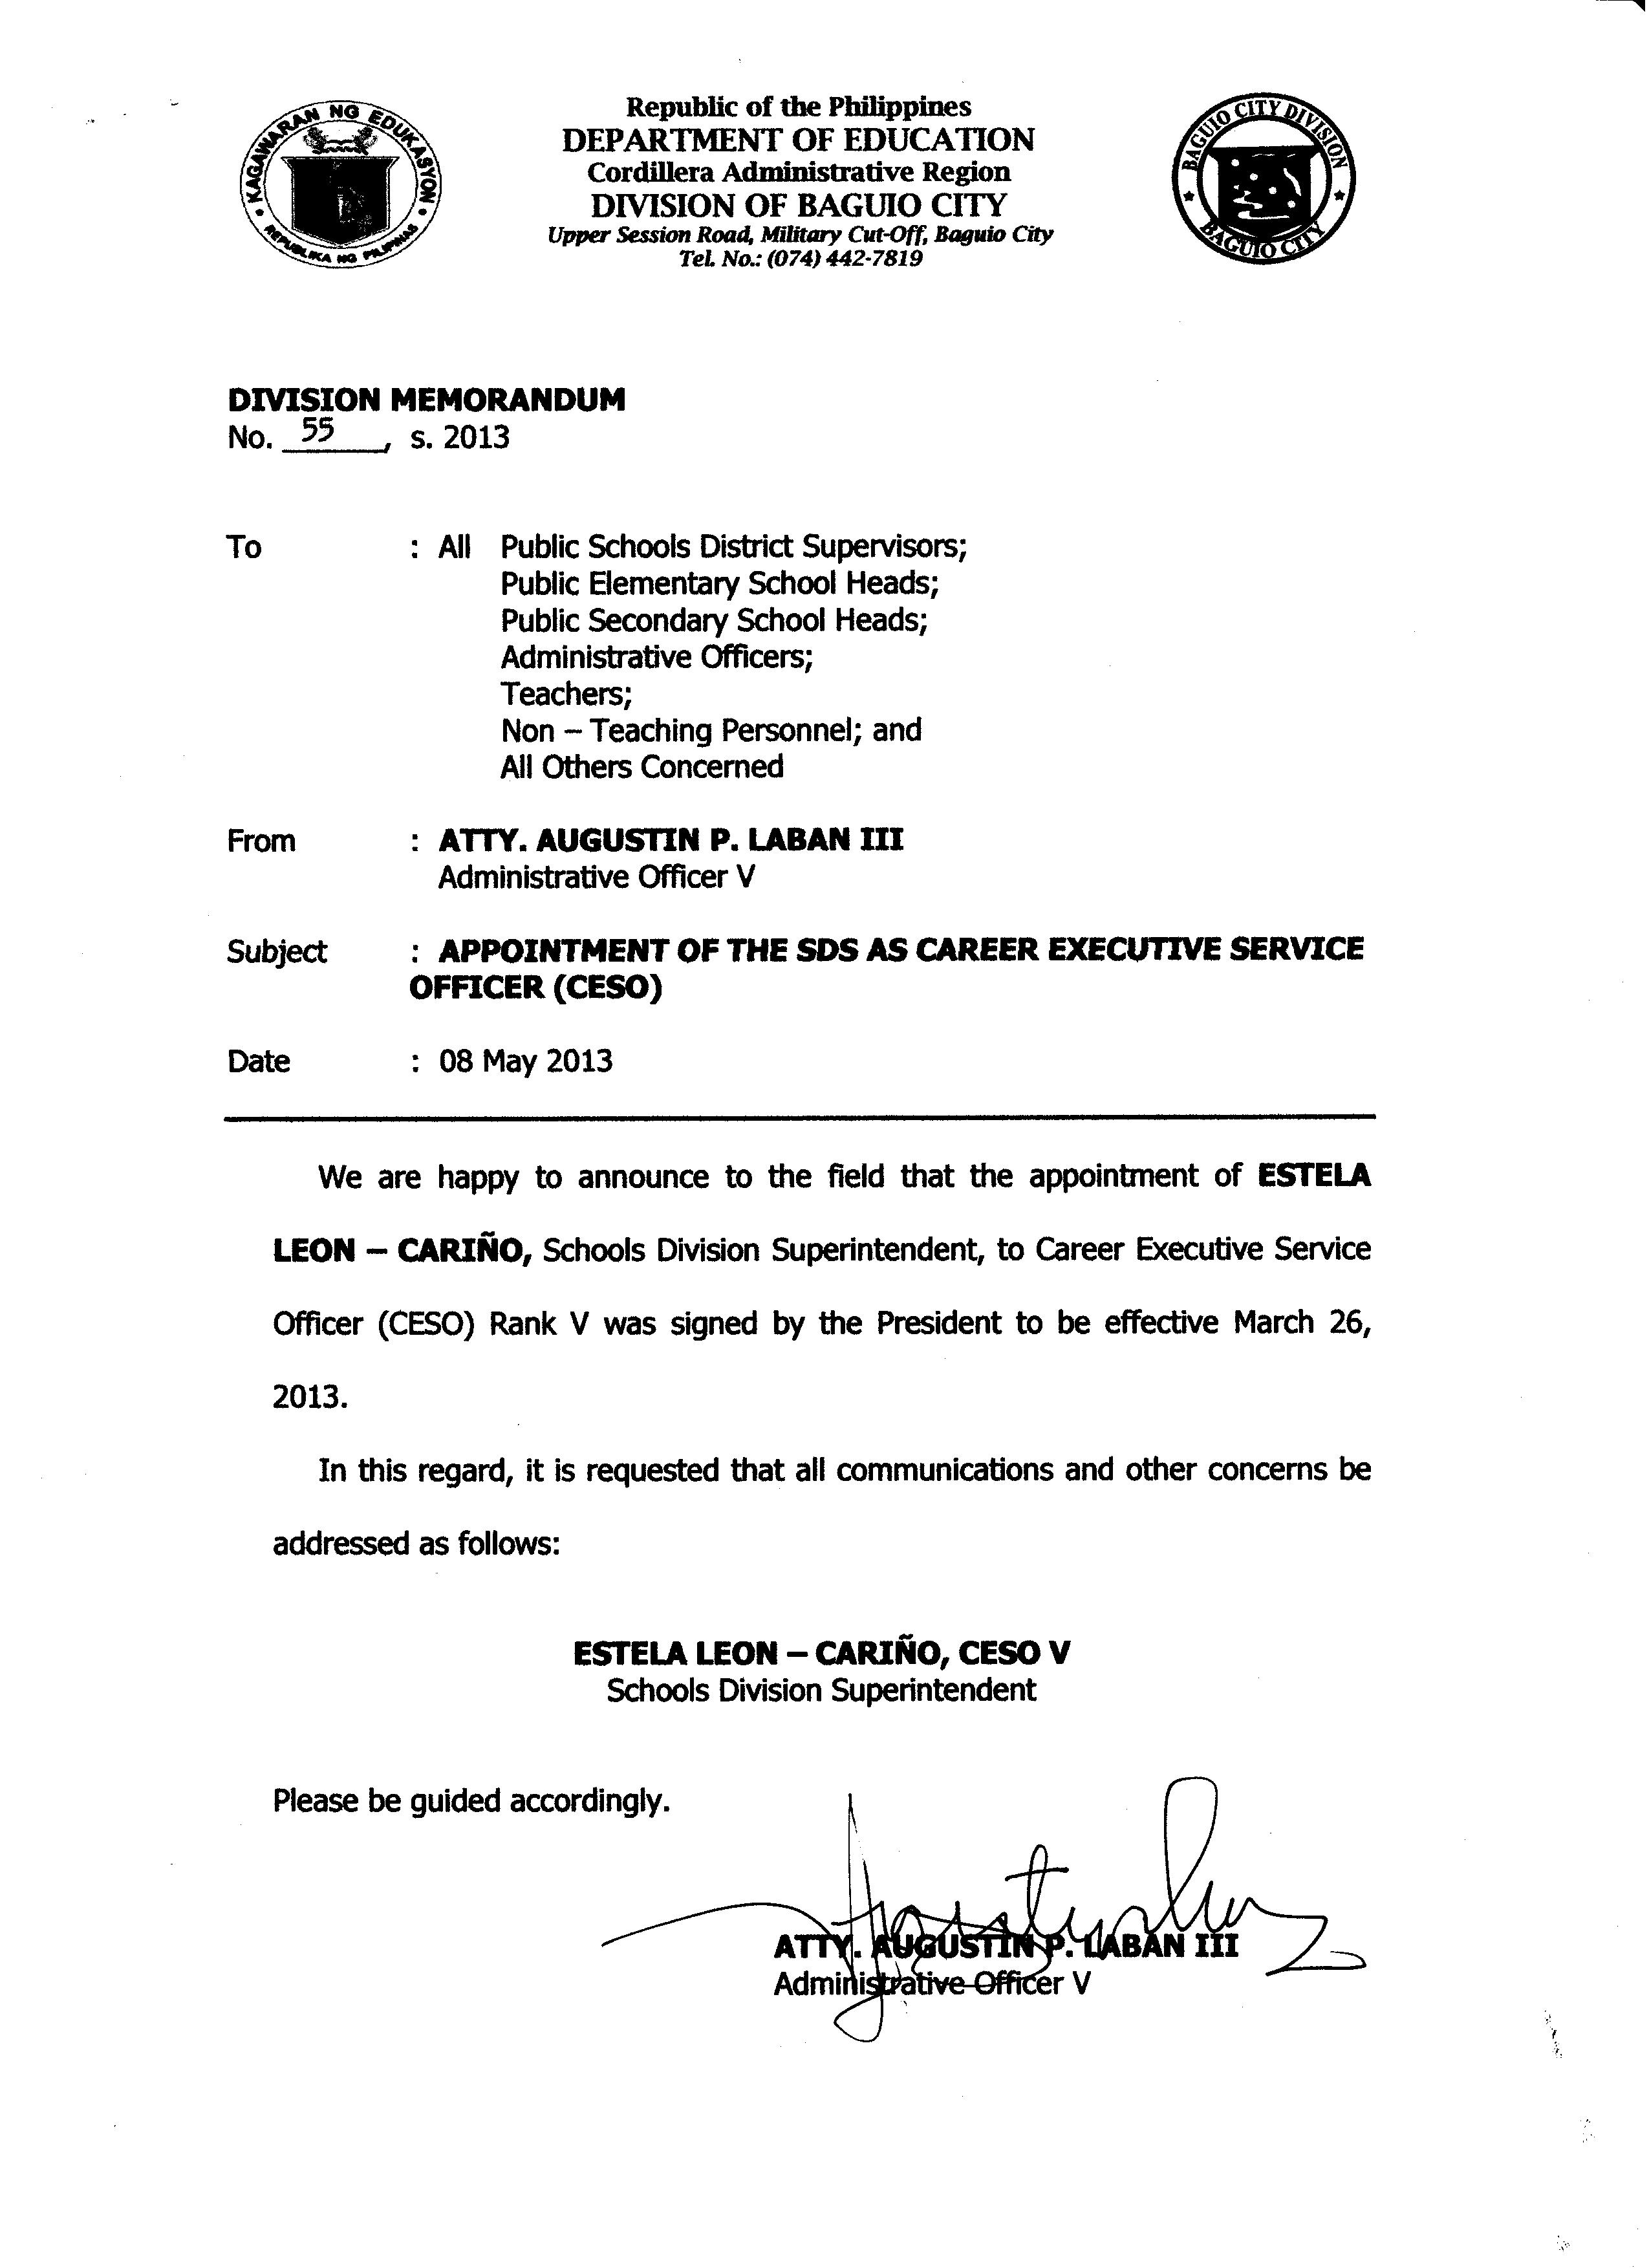 deped order no assignment policy